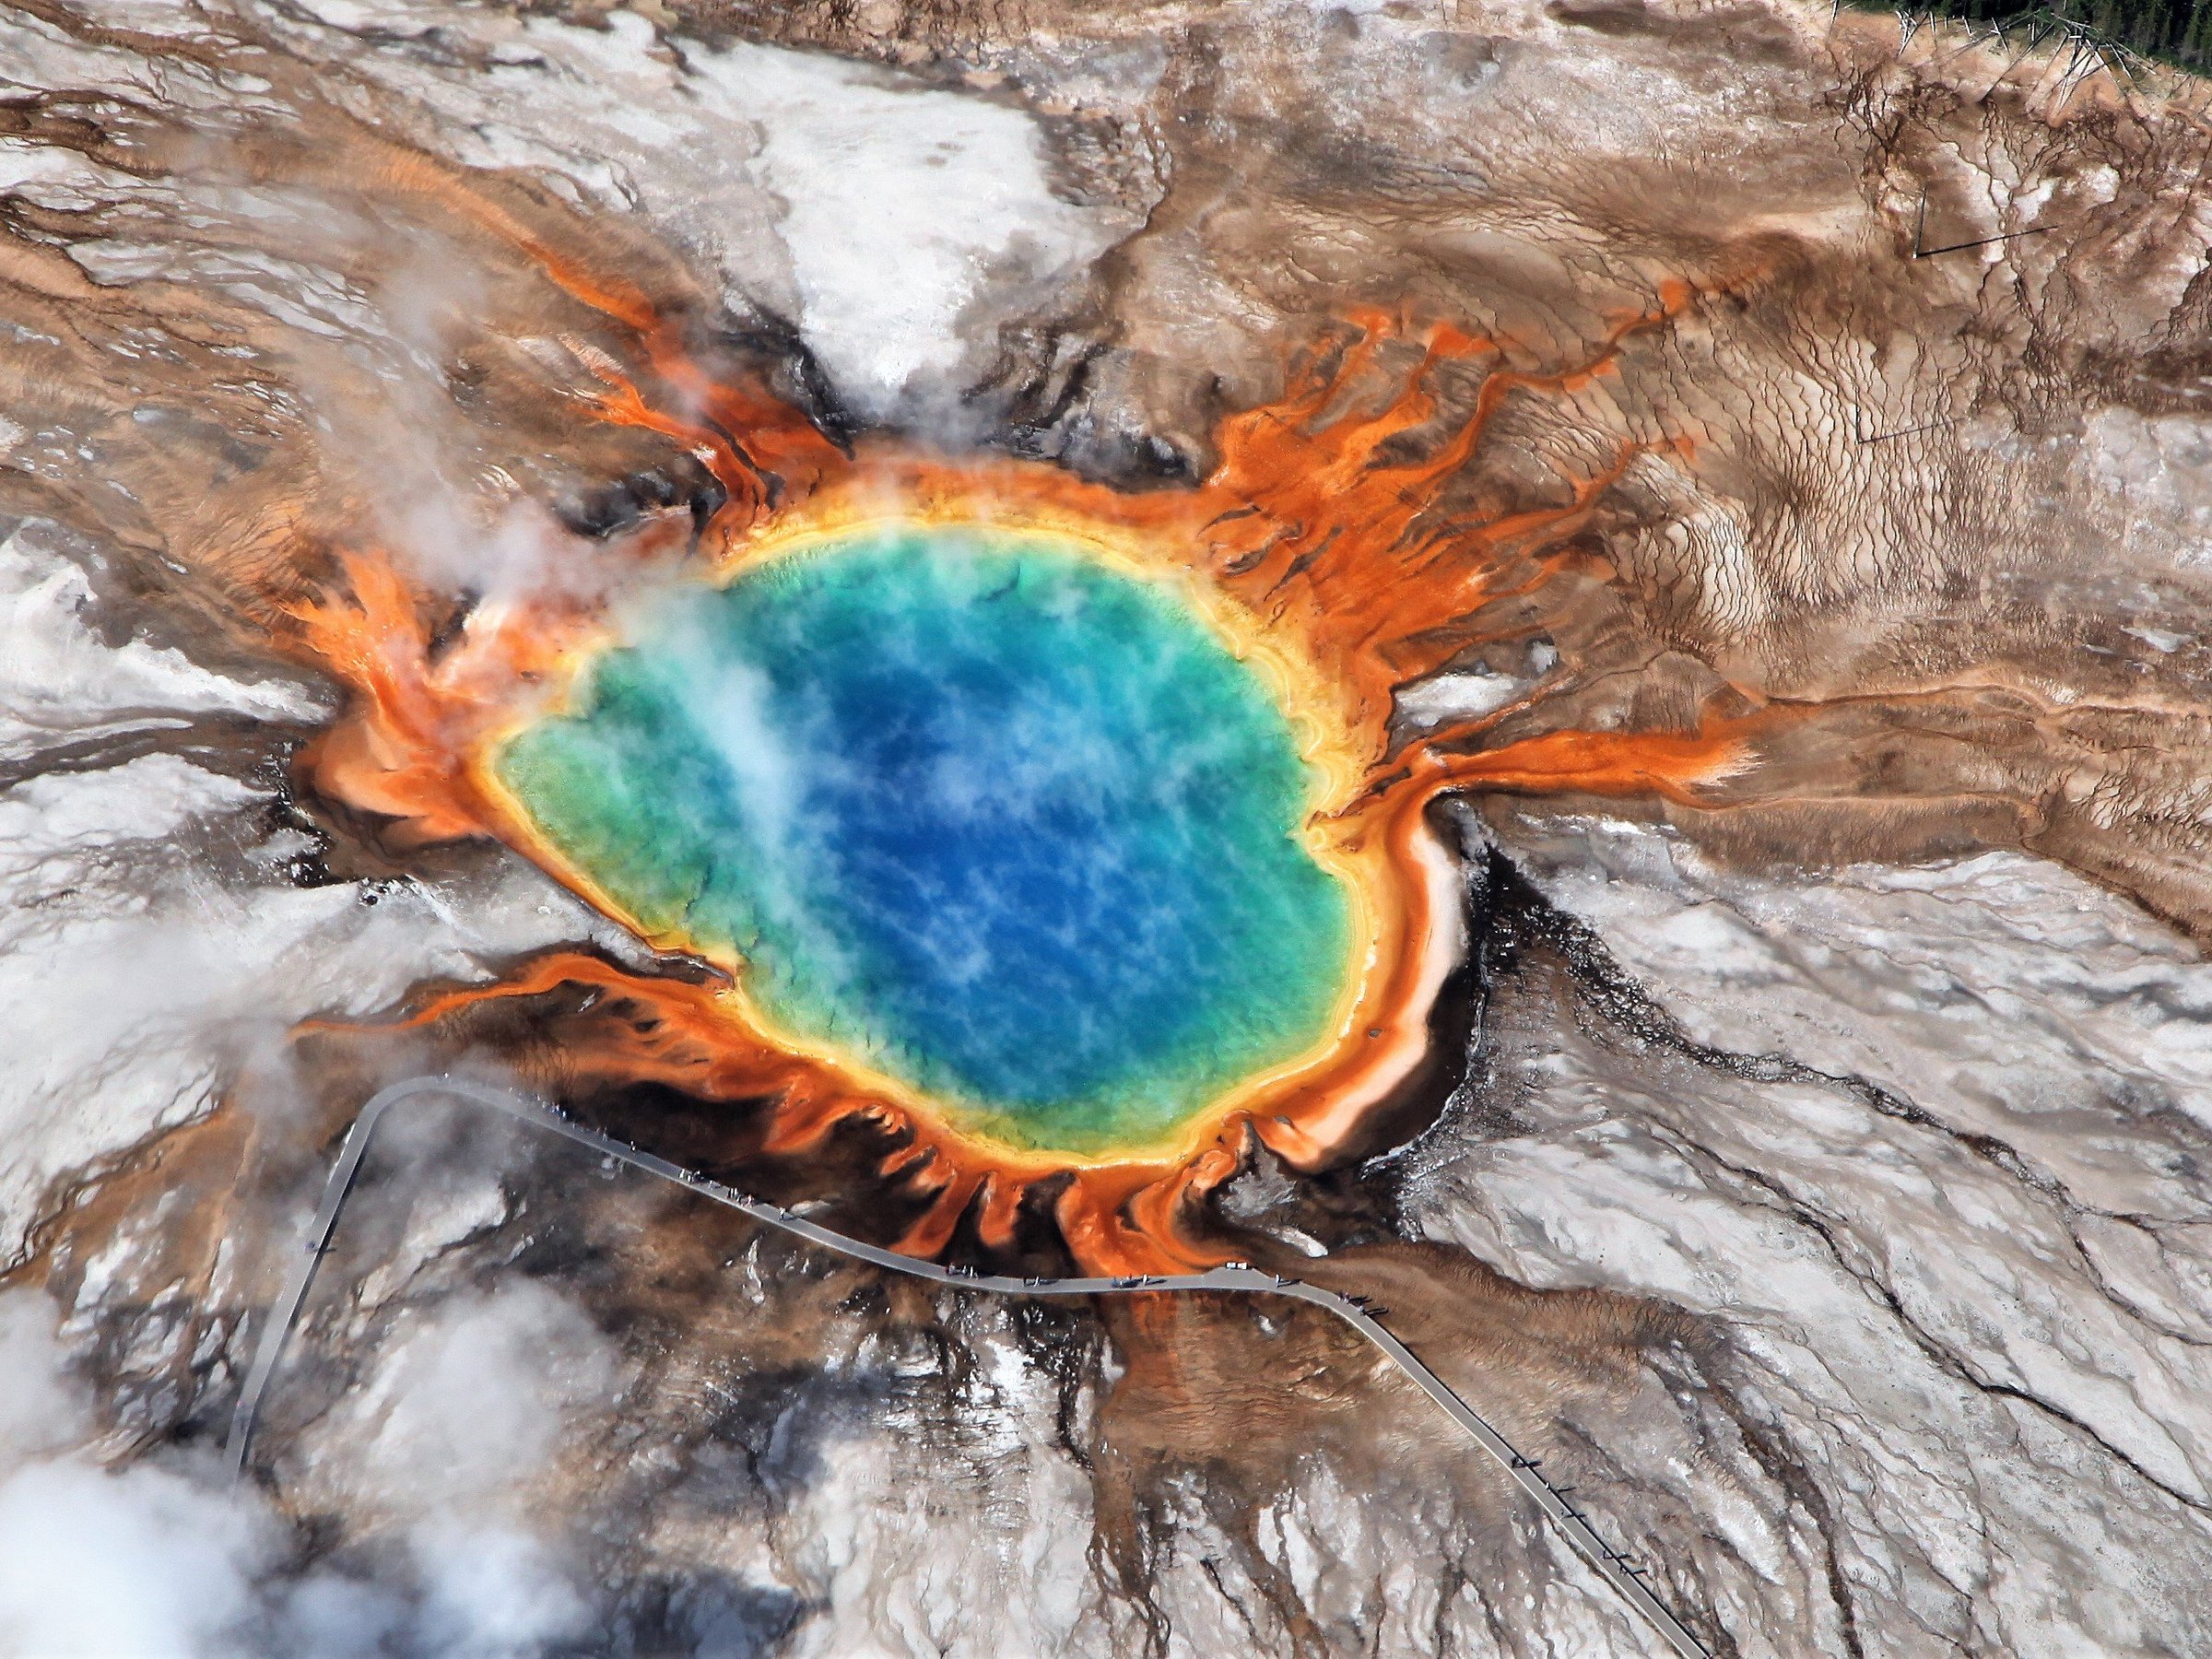 Yellowstone Wildlife and Photo Tours (Cody) - All You Need to Know ...